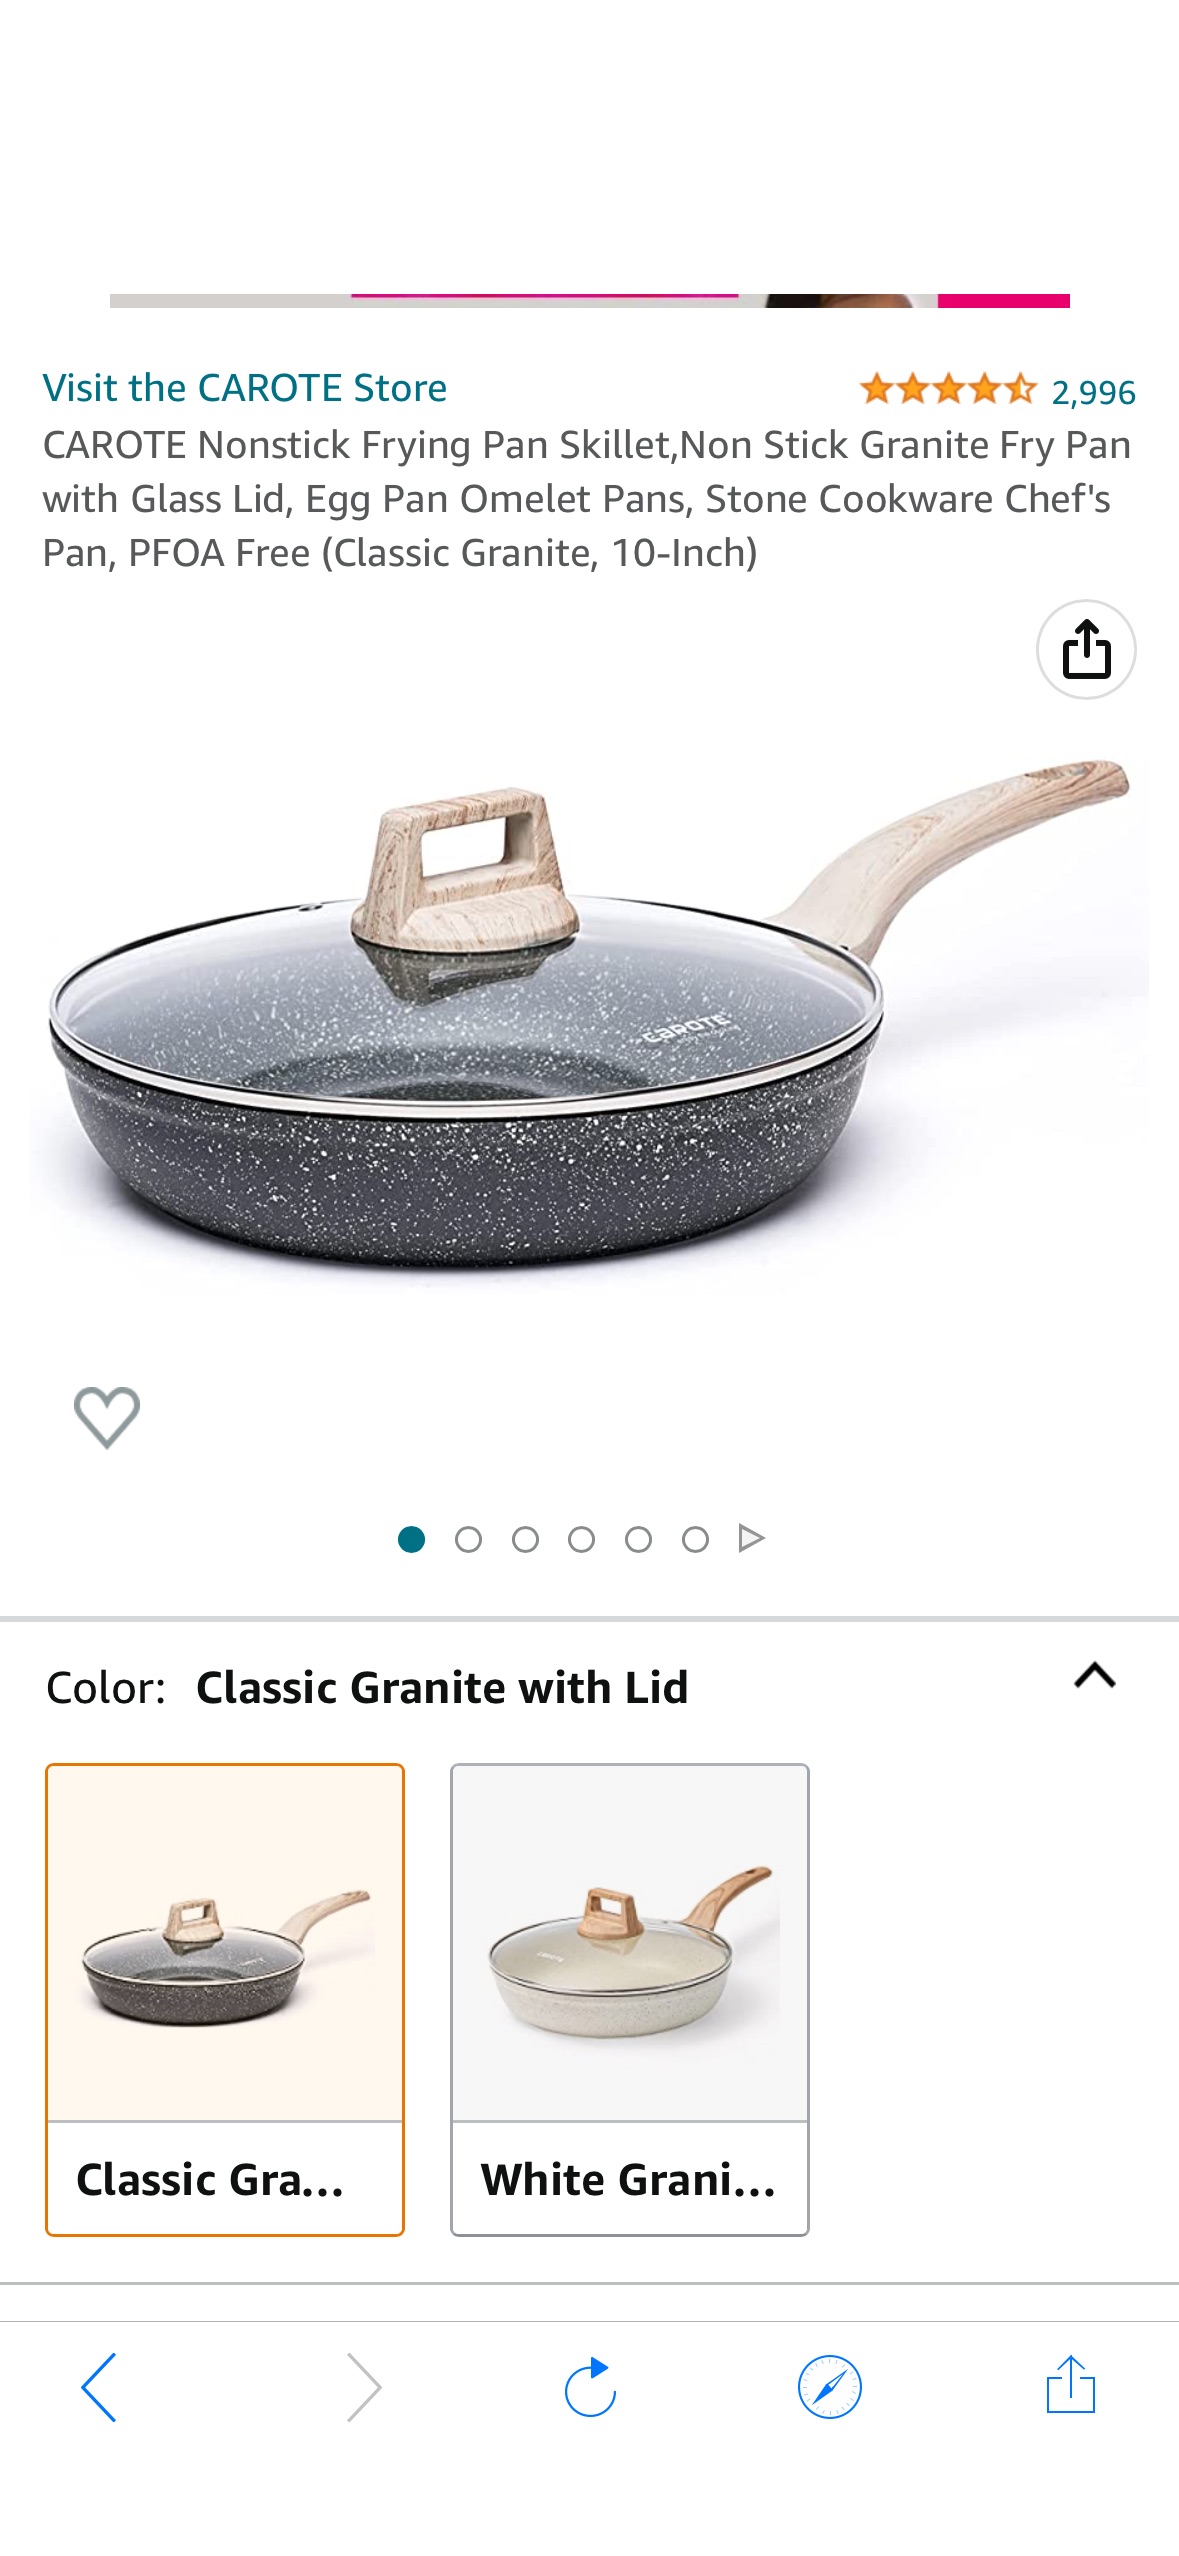 Amazon.com: CAROTE Nonstick Frying Pan Skillet,Non Stick Granite Fry Pan with Glass Lid, Egg Pan Omelet Pans, Stone Cookware Chef's Pan, PFOA Free (Classic Granite, 10-Inch):不粘锅